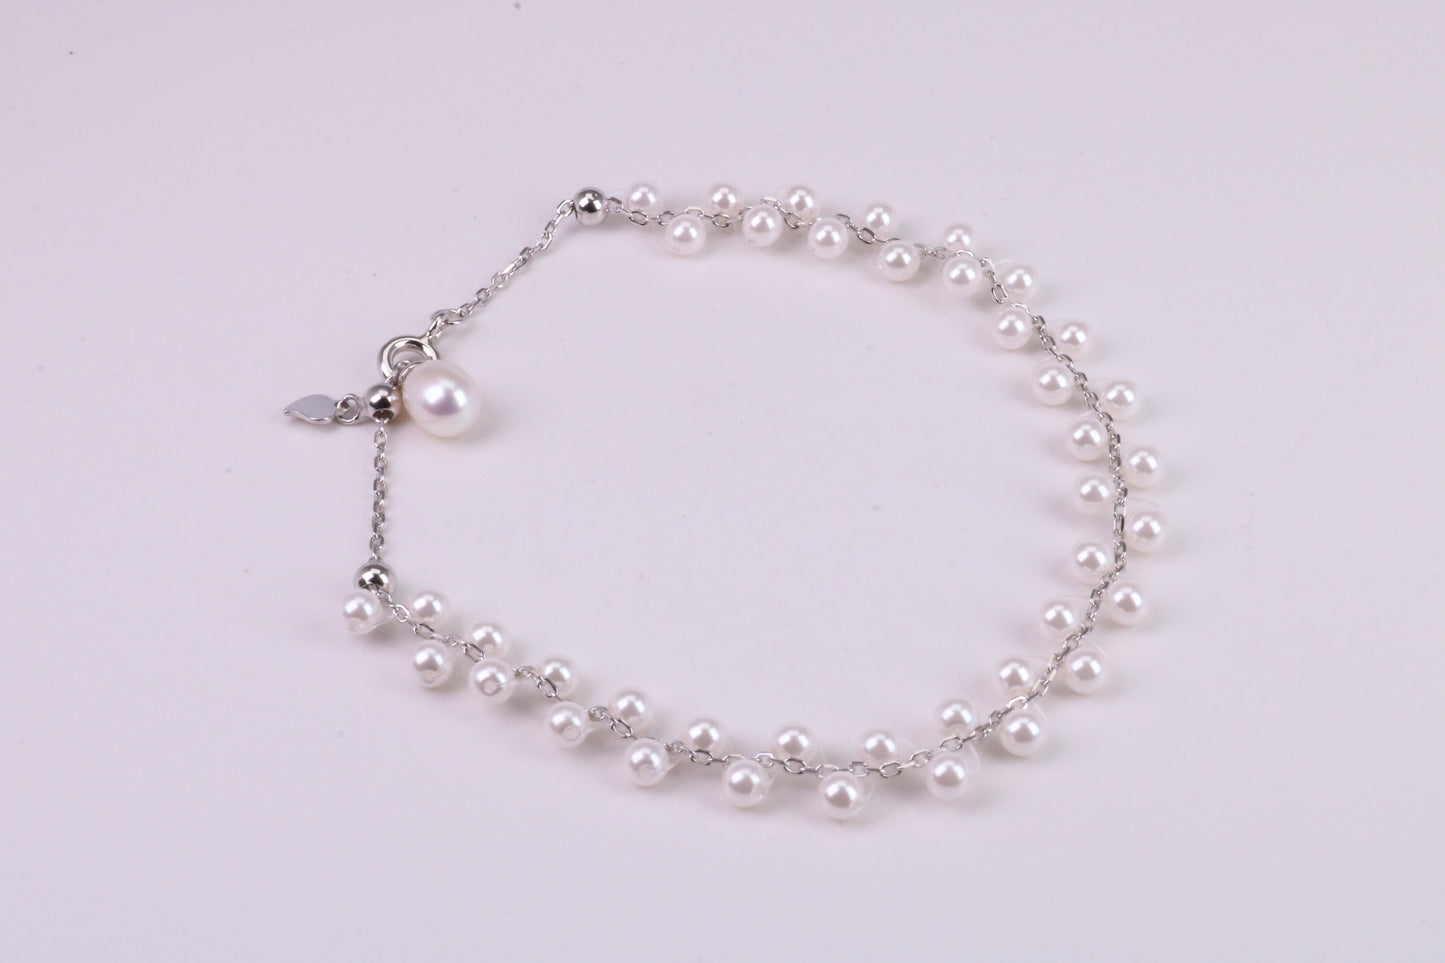 Natural 7.50 inches Long x 7 mm Wide Pearl Bracelet, made from Sterling Silver